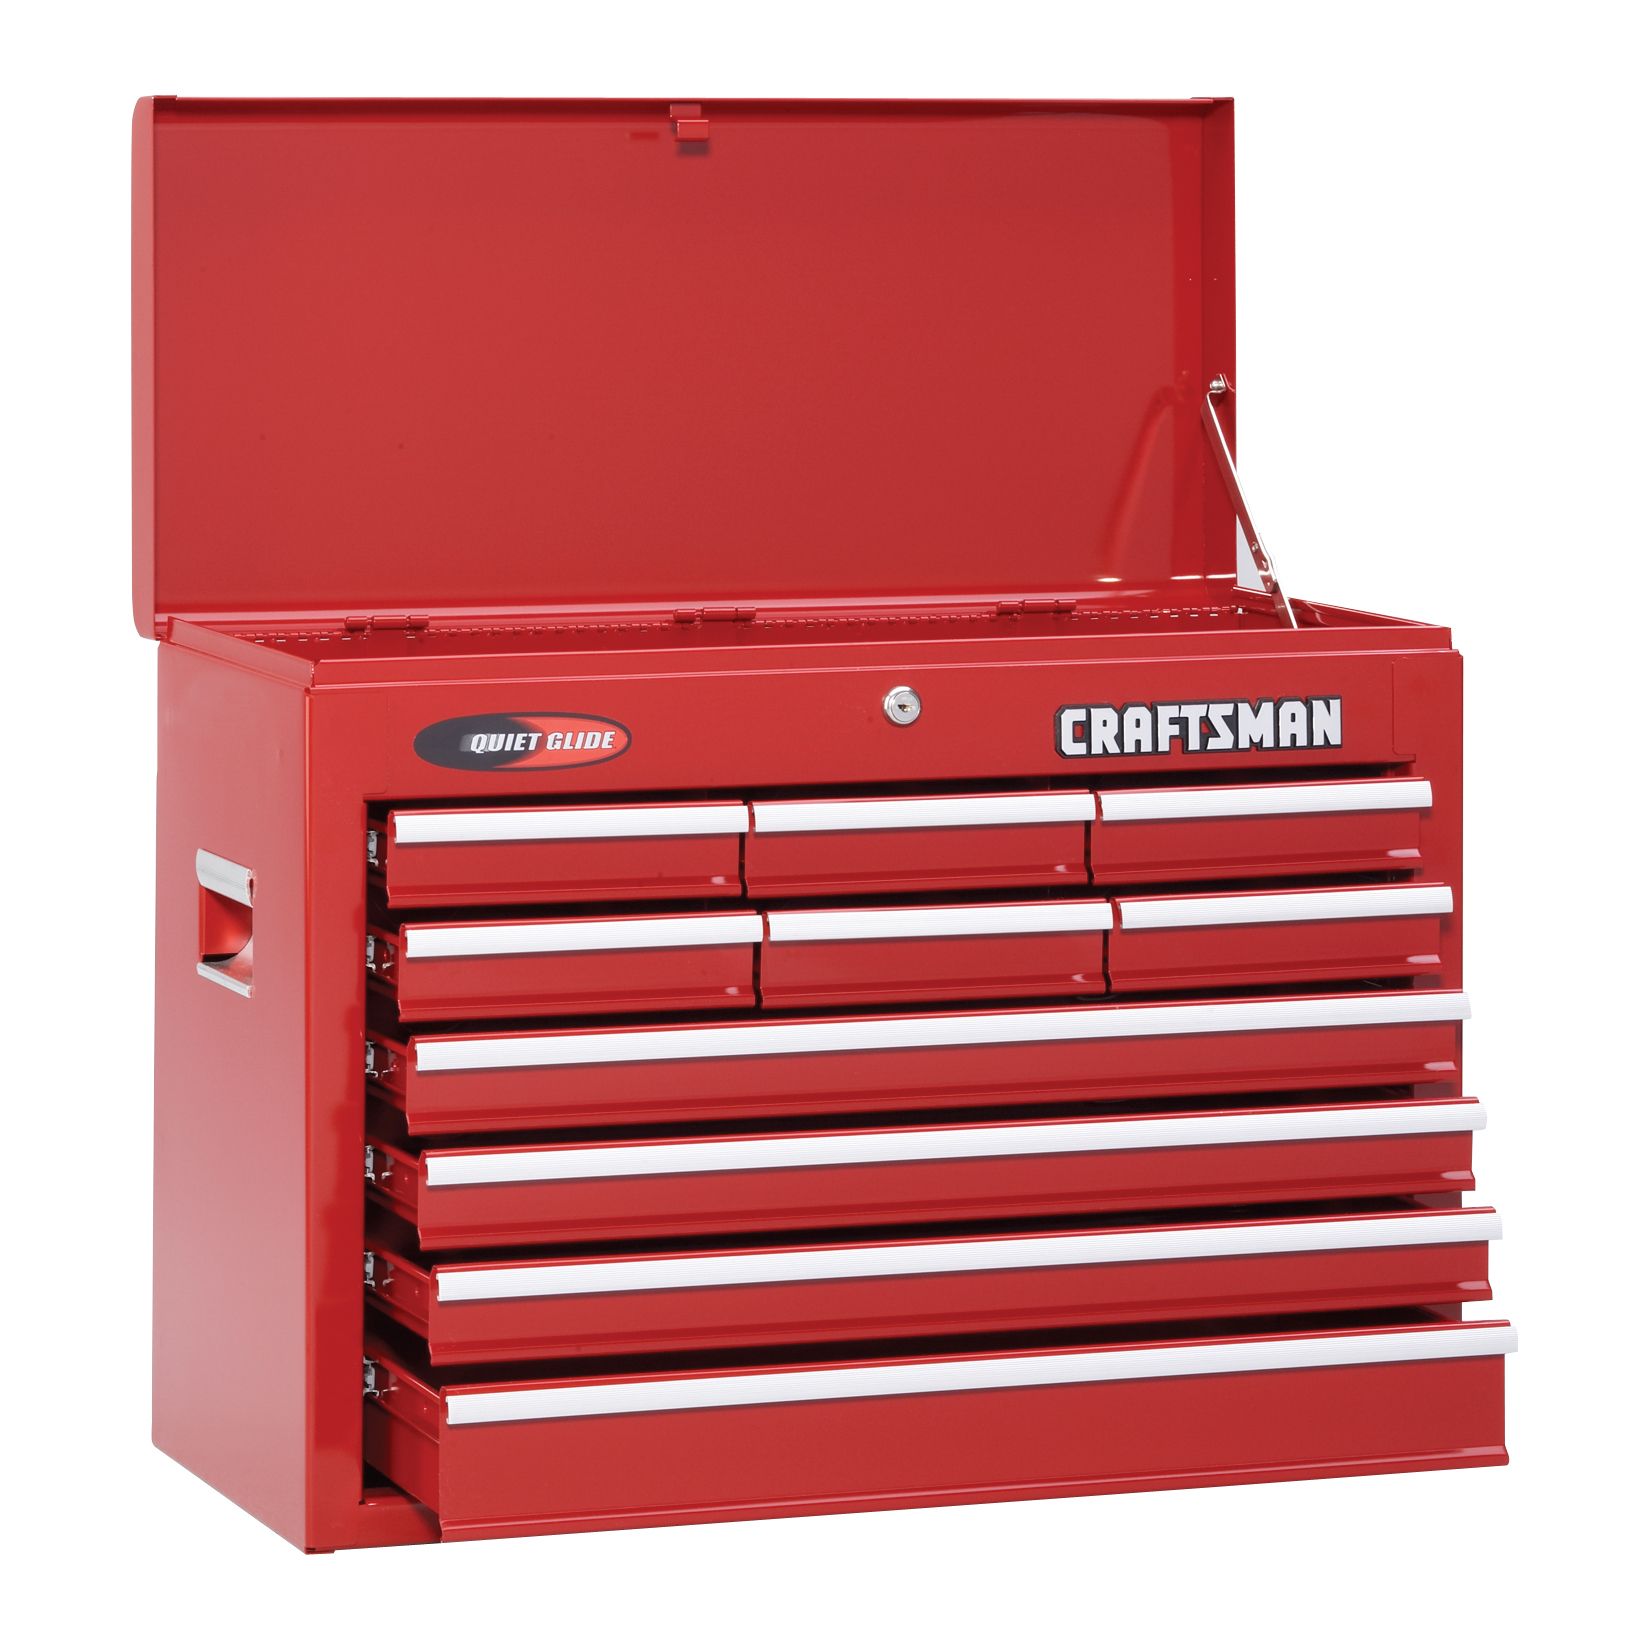 Official Craftsman tool chest parts | Sears PartsDirect